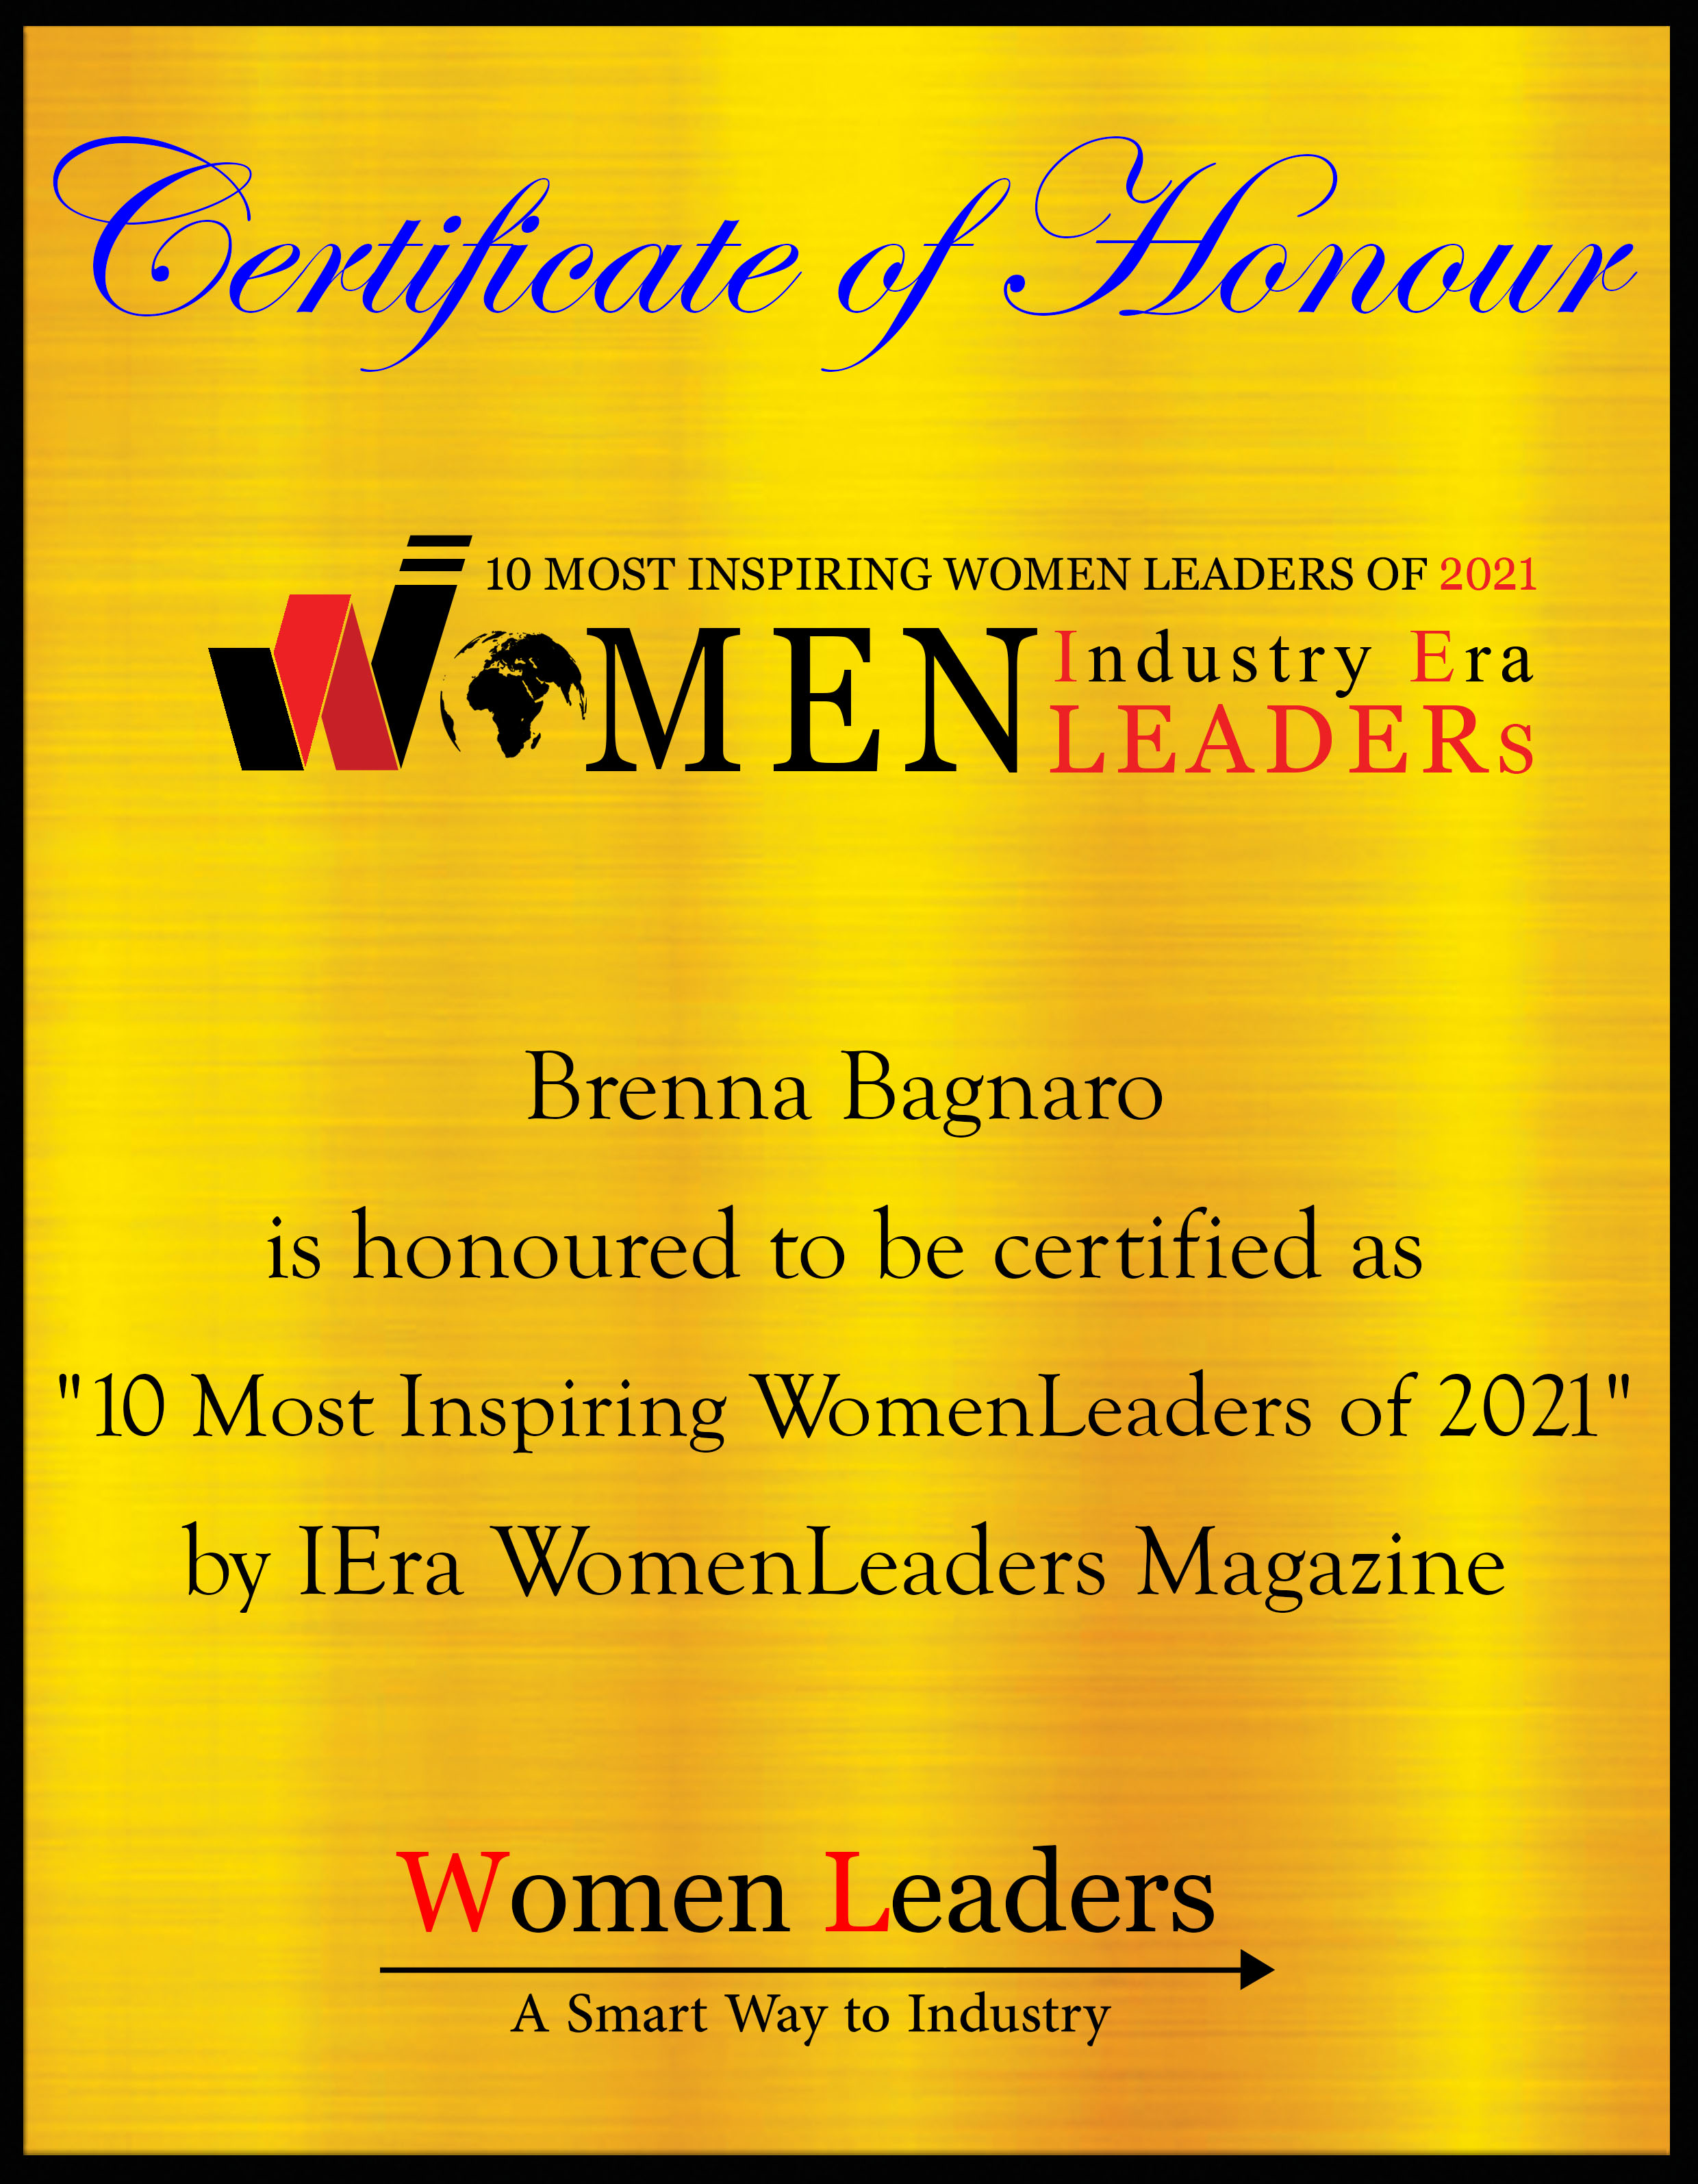 Brenna Bagnaro, Director of Marketing and Client Relations of Polston Tax, Most Inspiring WomenLeaders of 2021